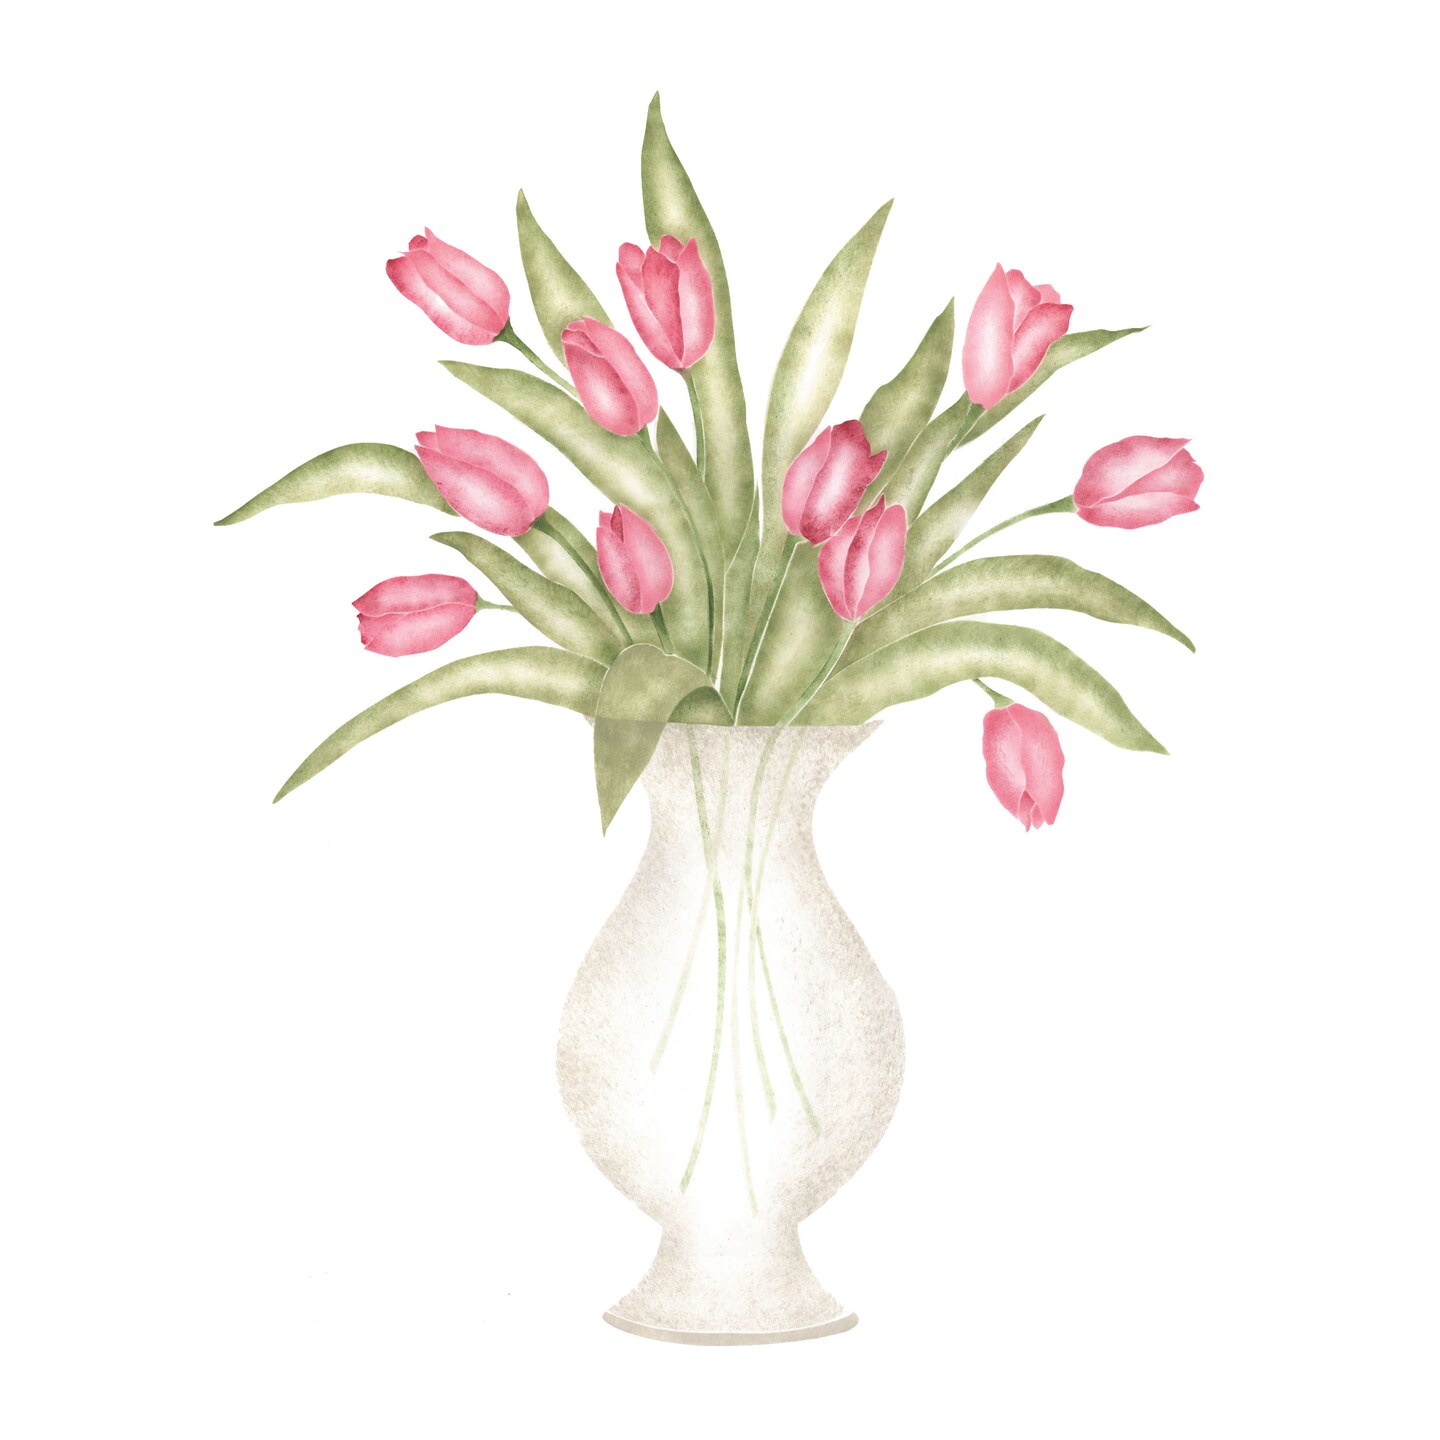 Vase of Tulips Wall Stencil | 3074 by Designer Stencils | Floral Stencils | Reusable Art Craft Stencils for Painting on Walls, Canvas, Wood | Reusable Plastic Paint Stencil for Home Makeover | Easy to Use &#x26; Clean Art Stencil